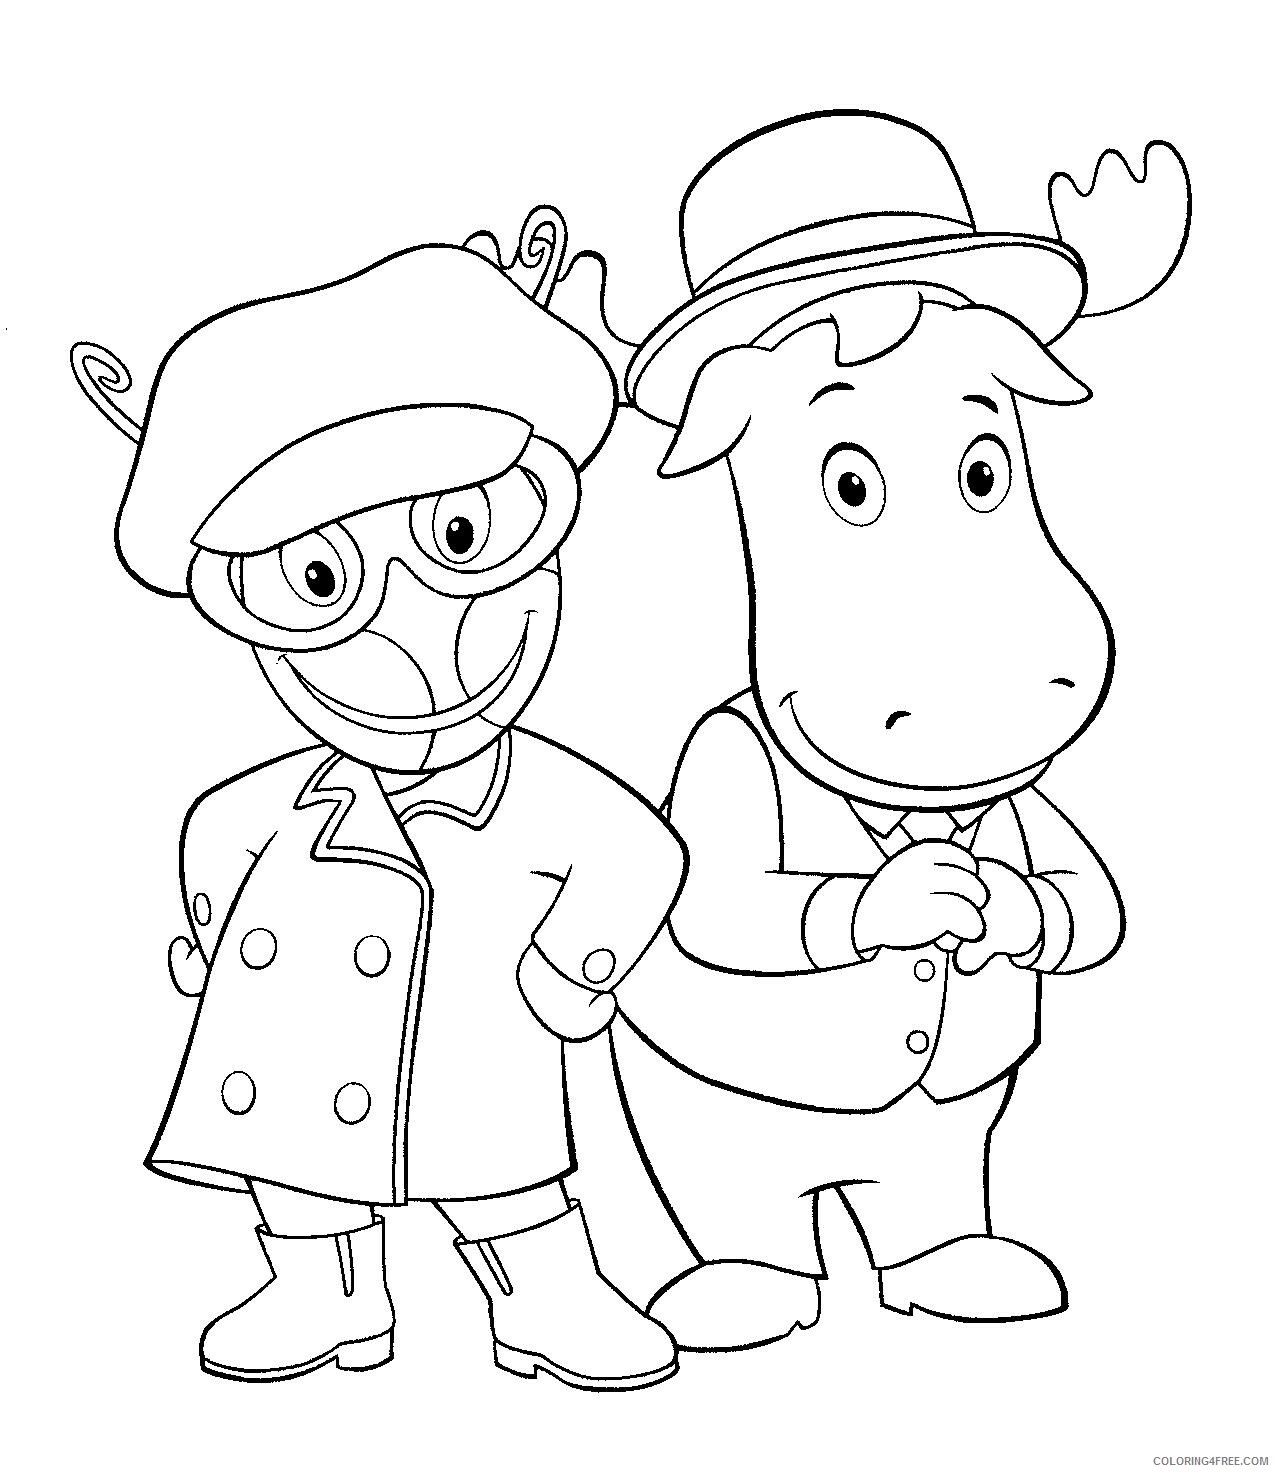 Backyardigans Coloring Pages TV Film Printable Backyardigan Printable 2020 00550 Coloring4free